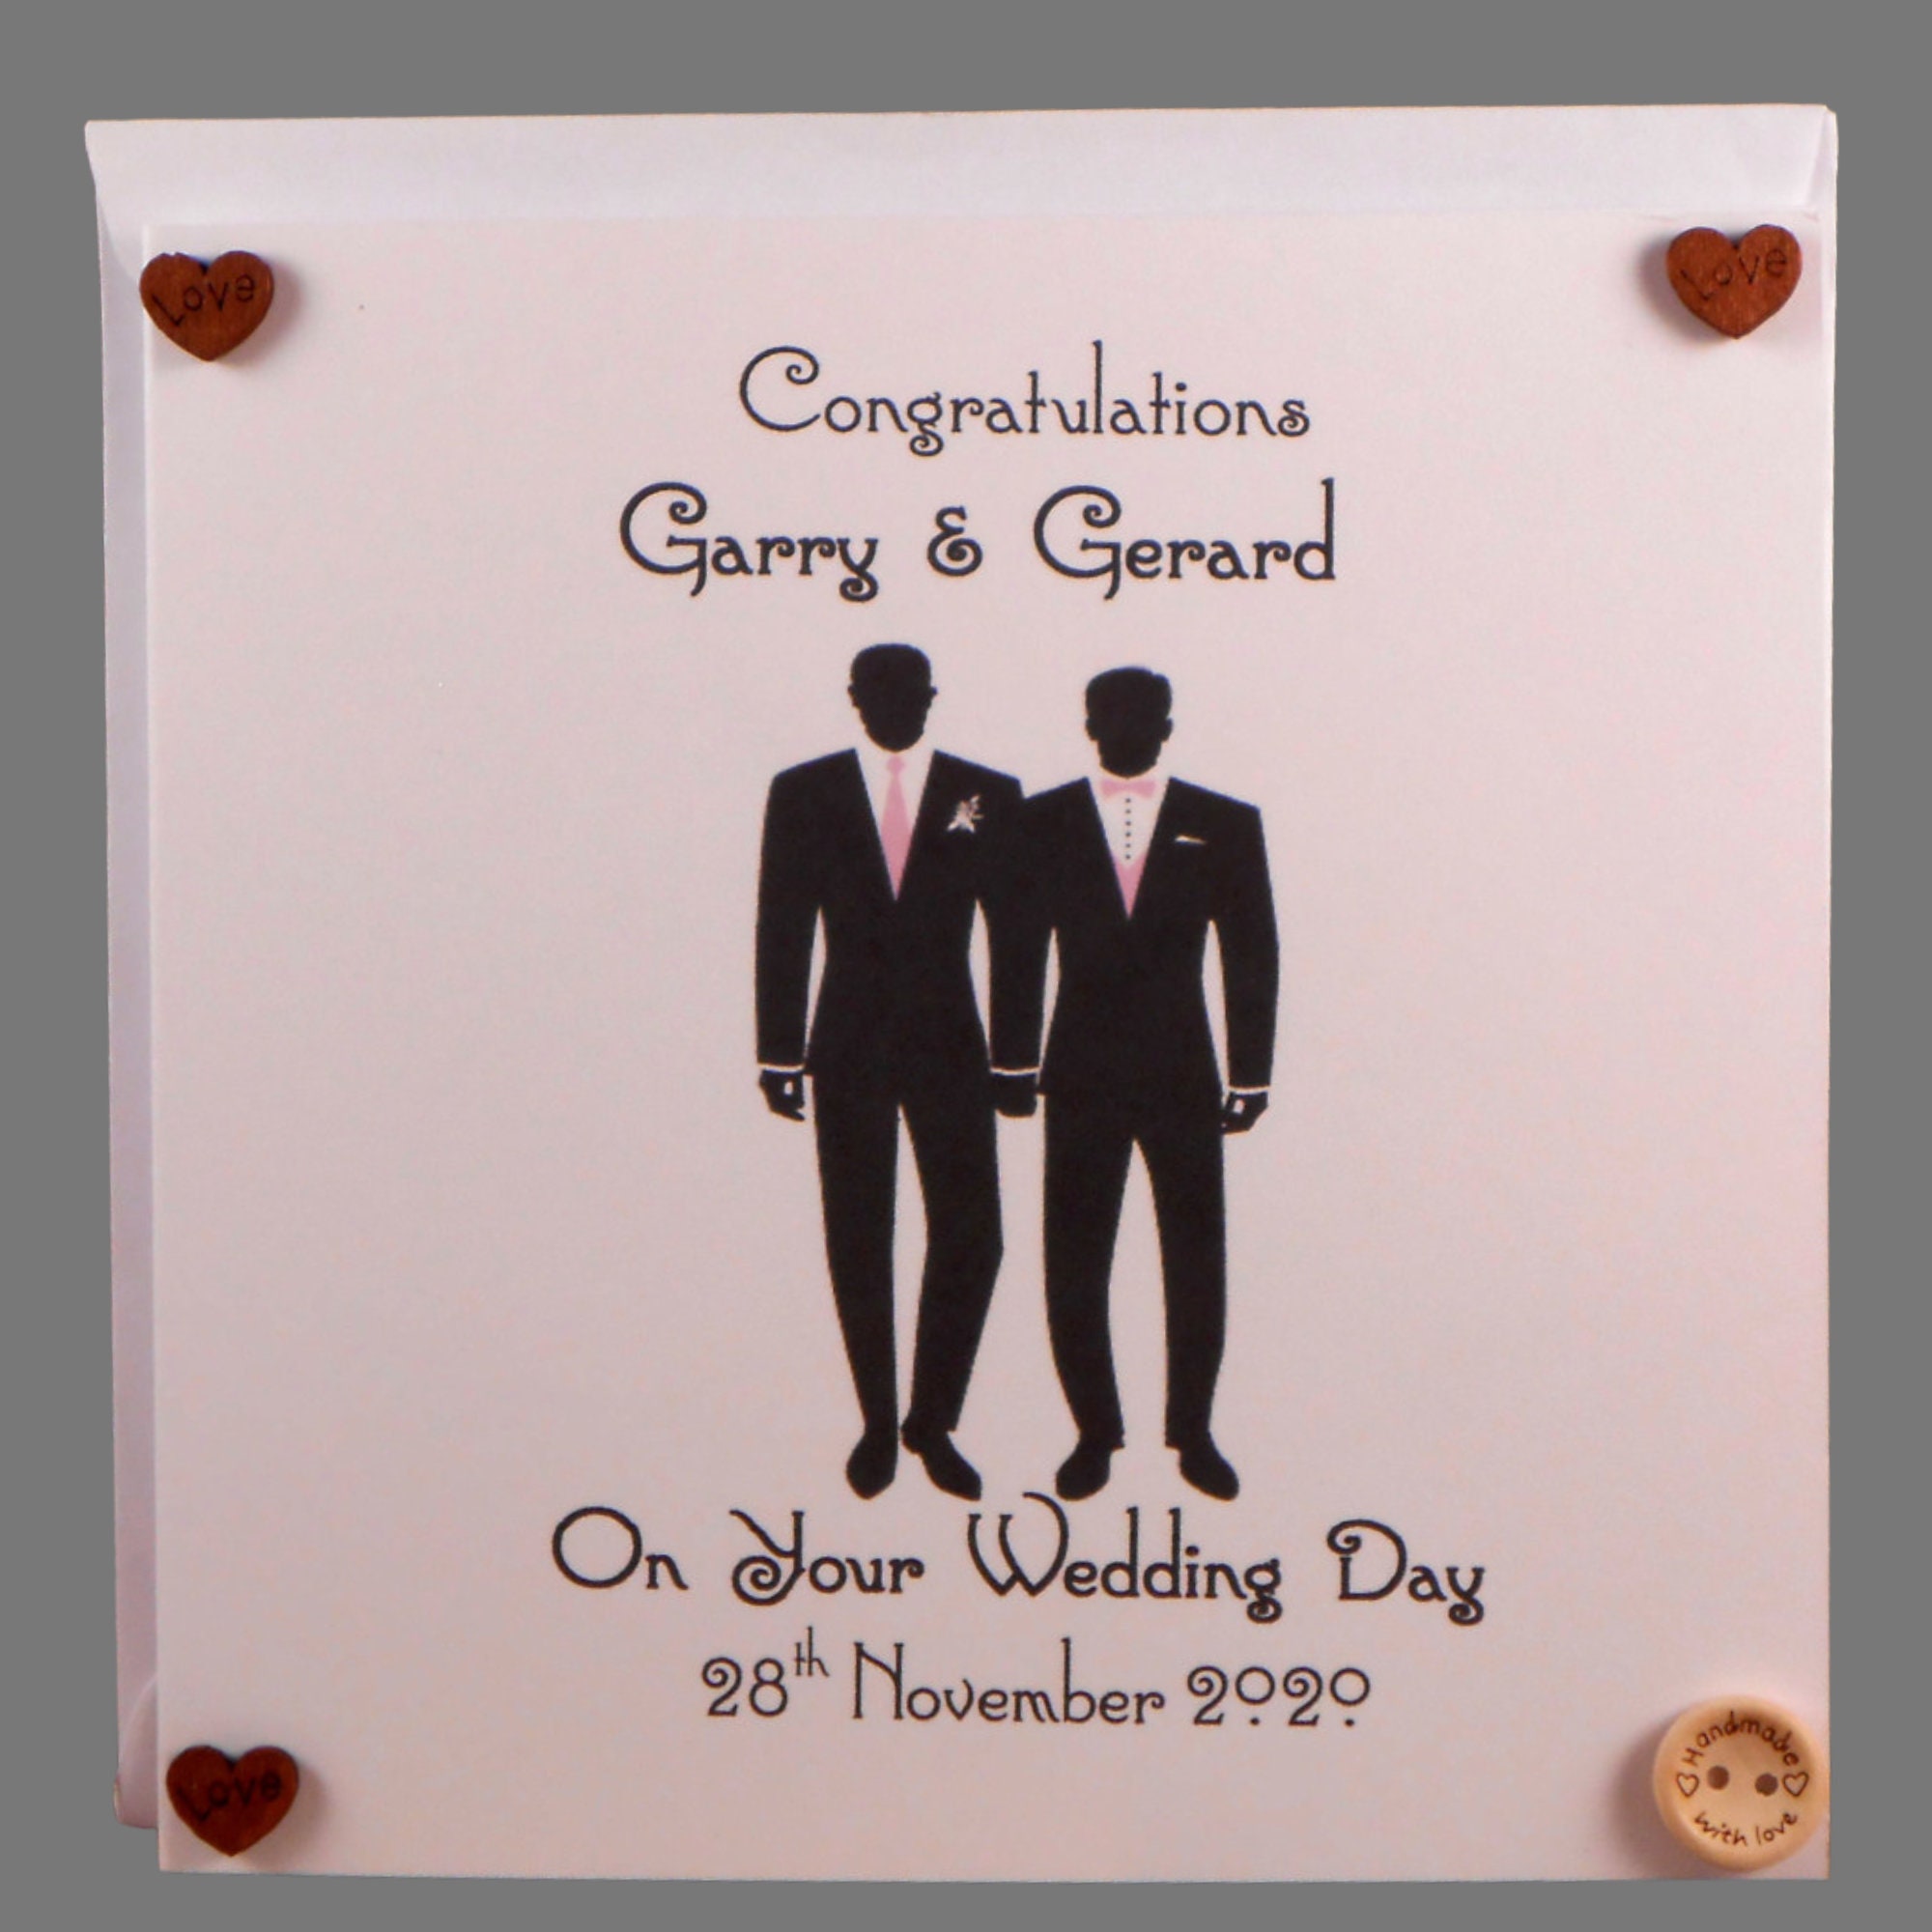 Gay Wedding Card Personalised That Sends Congratulations To A Etsy